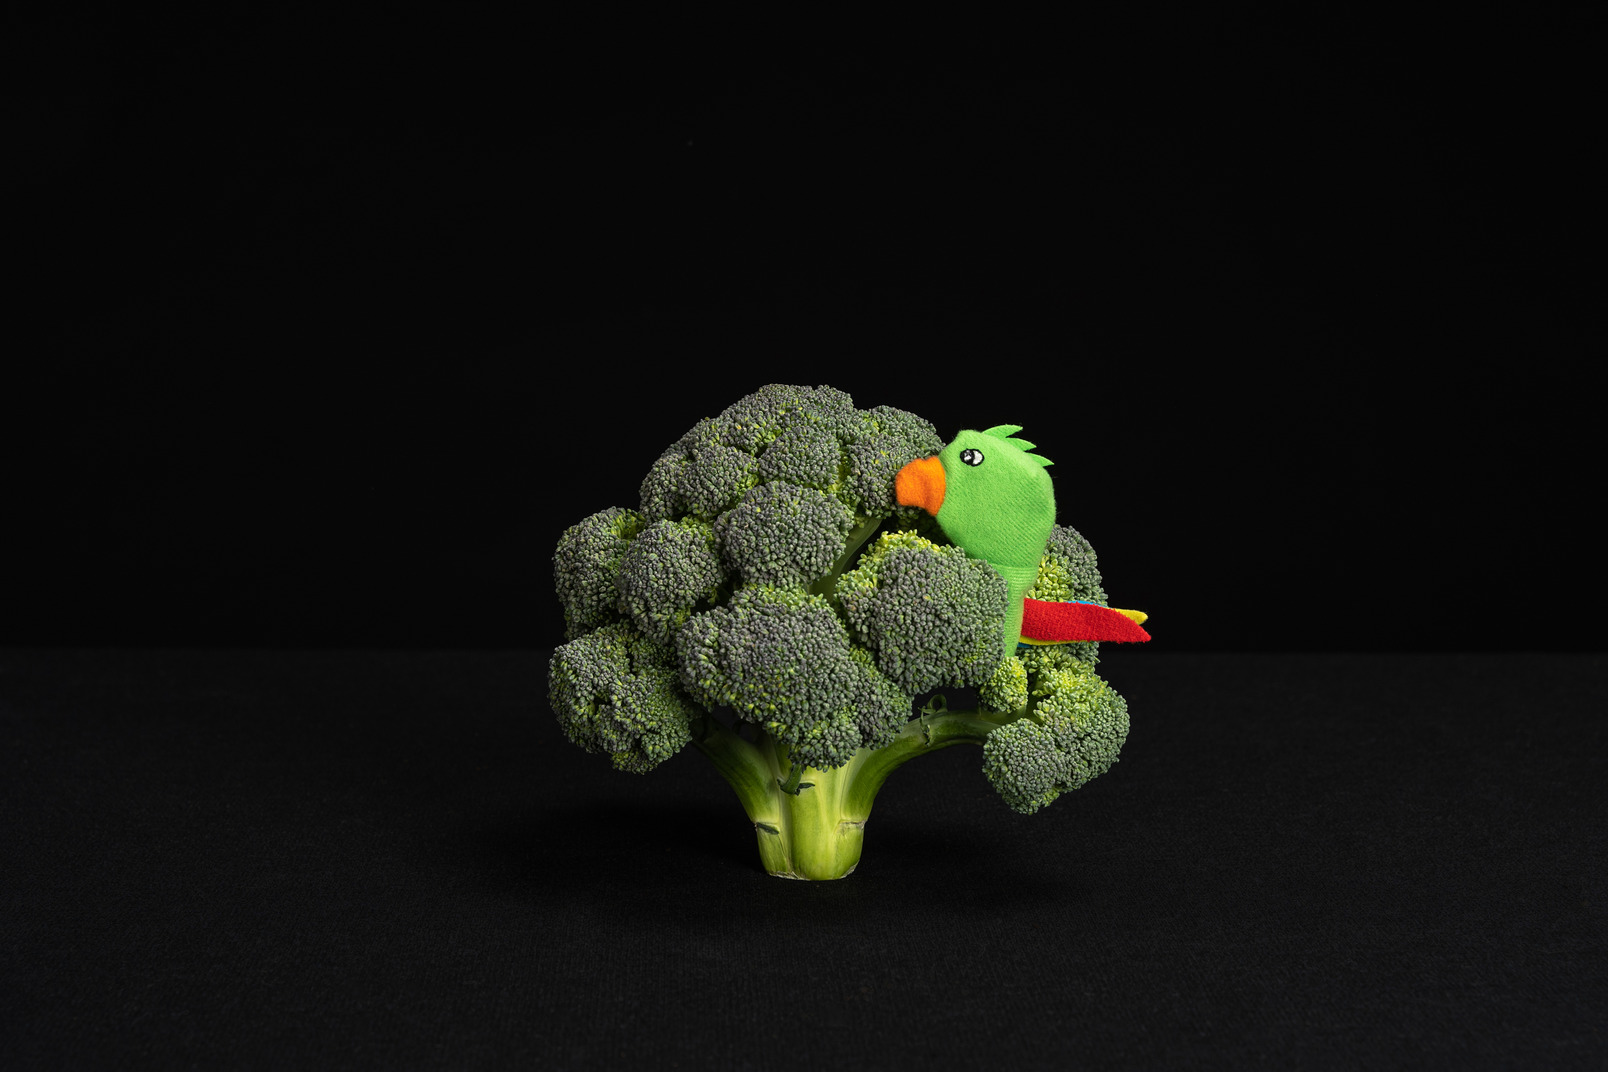 Toy parrot sitting in broccoli tree in black background